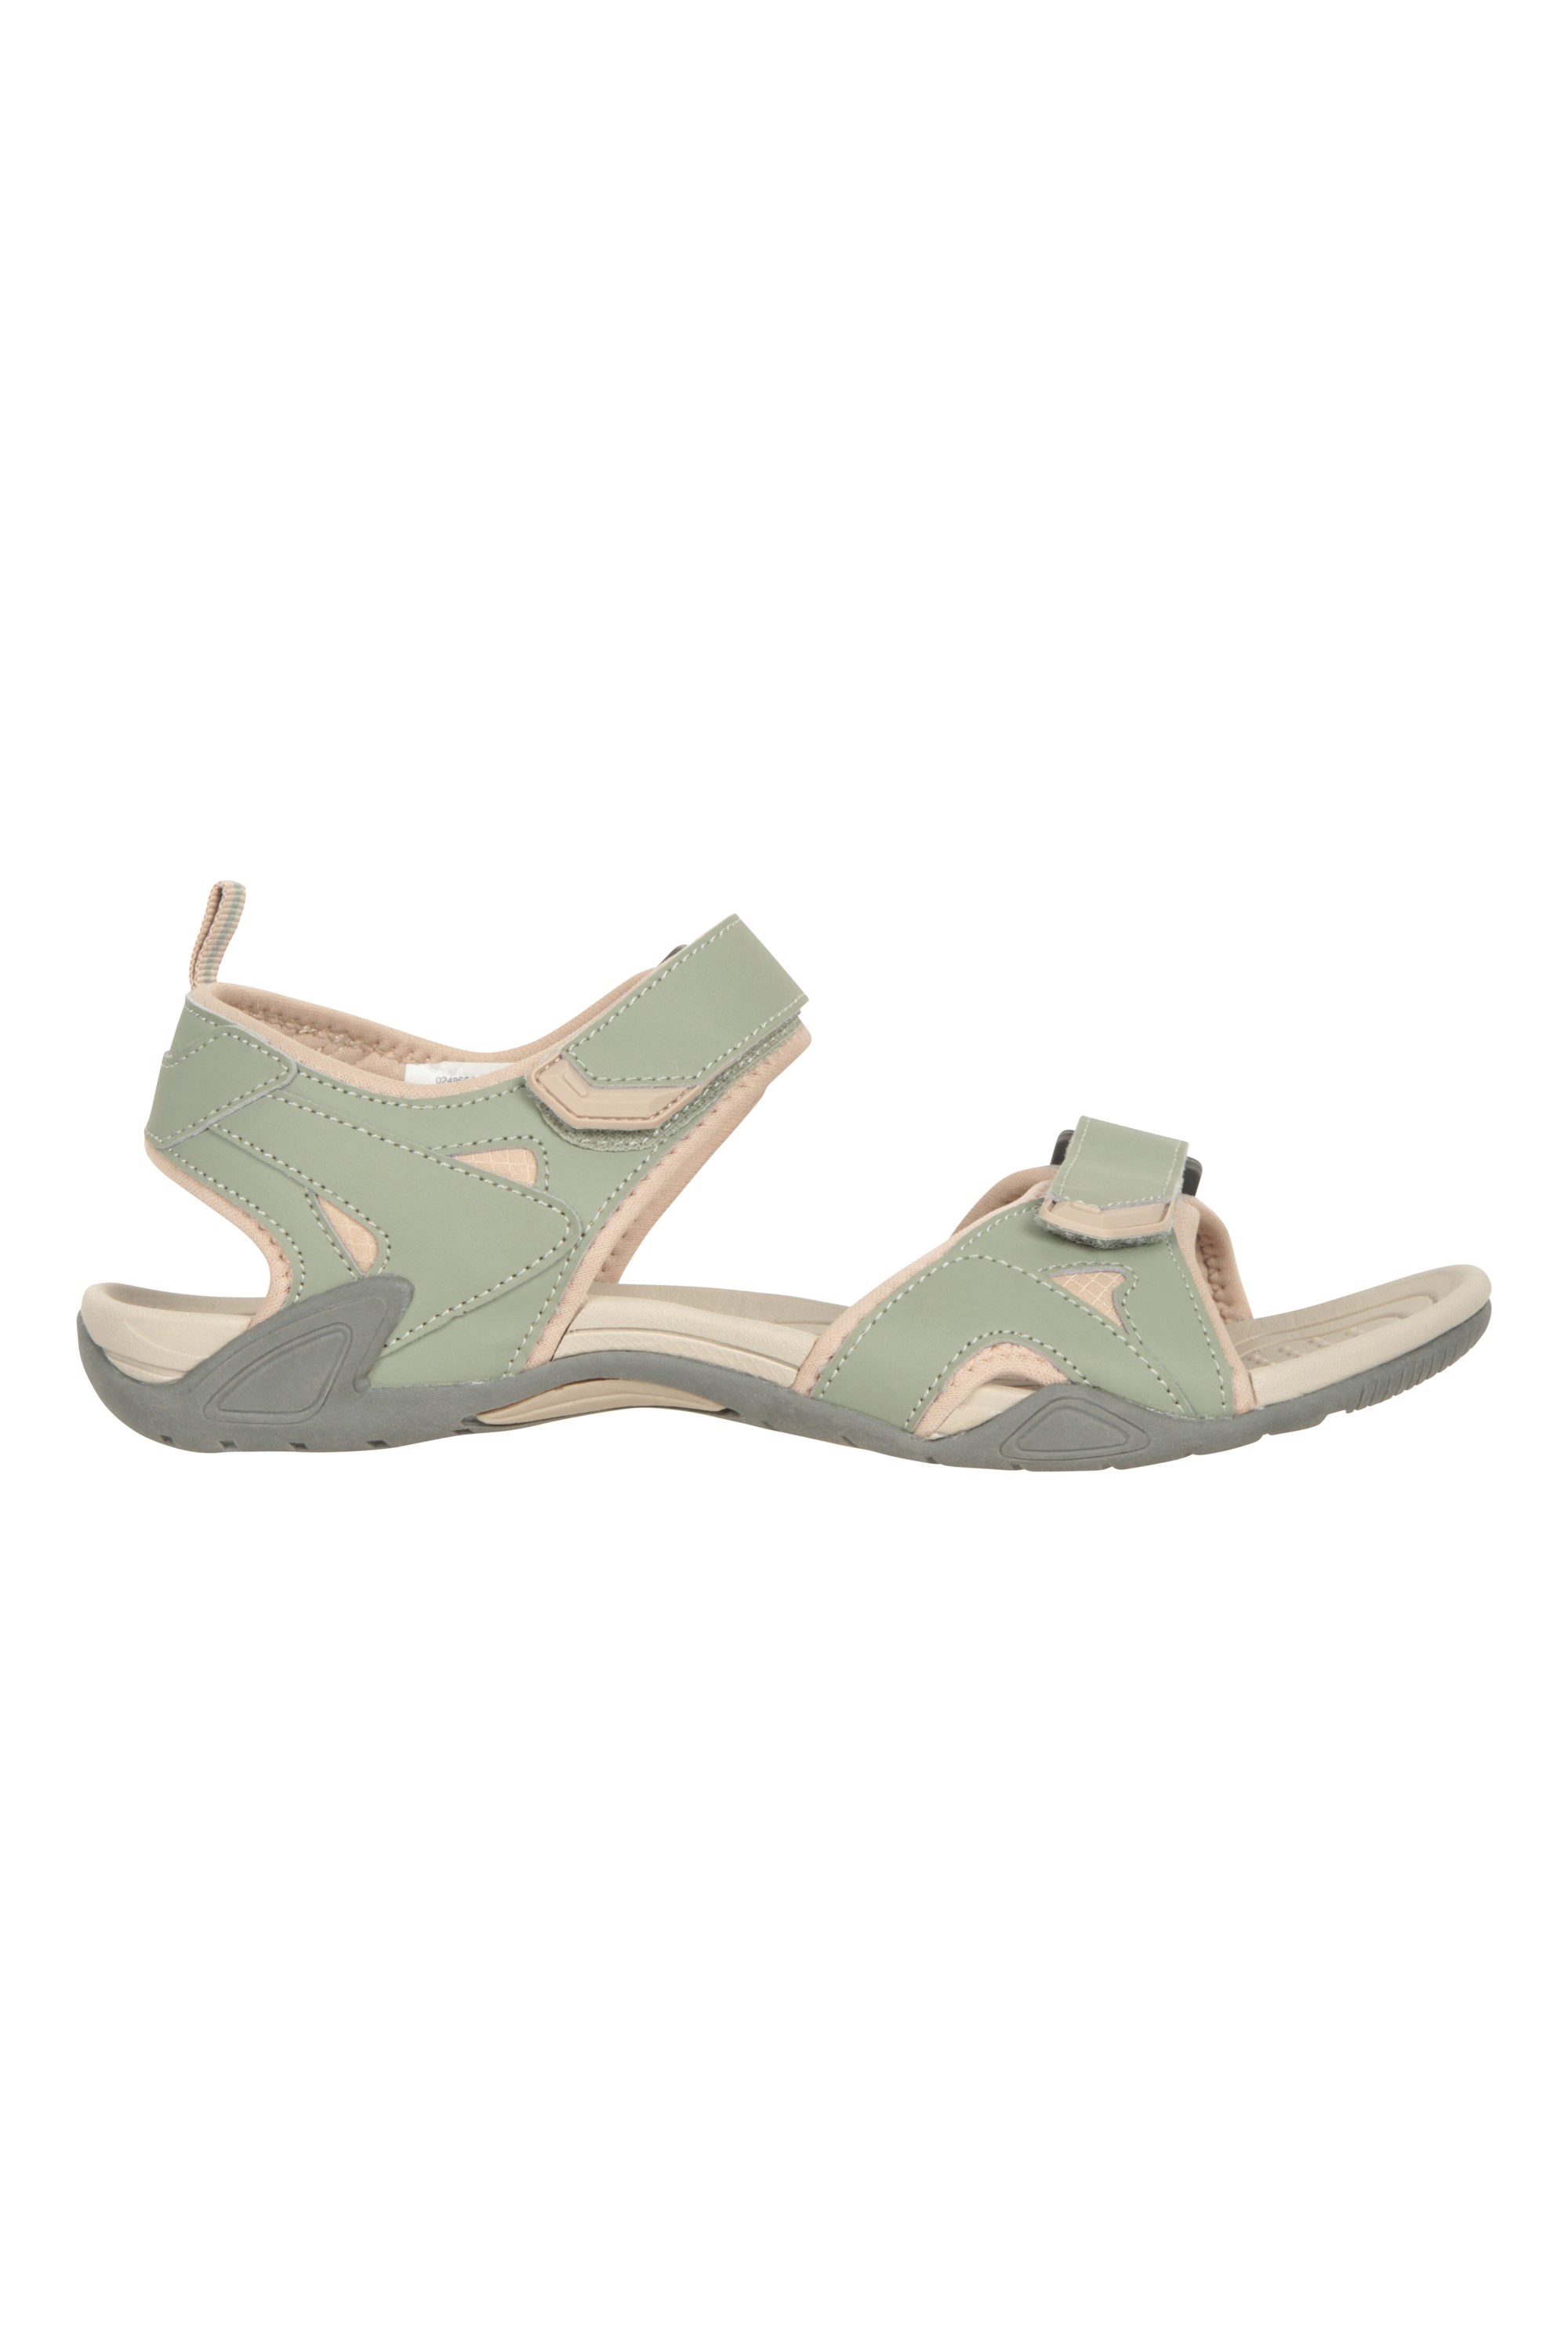 Andros Womens Sandals